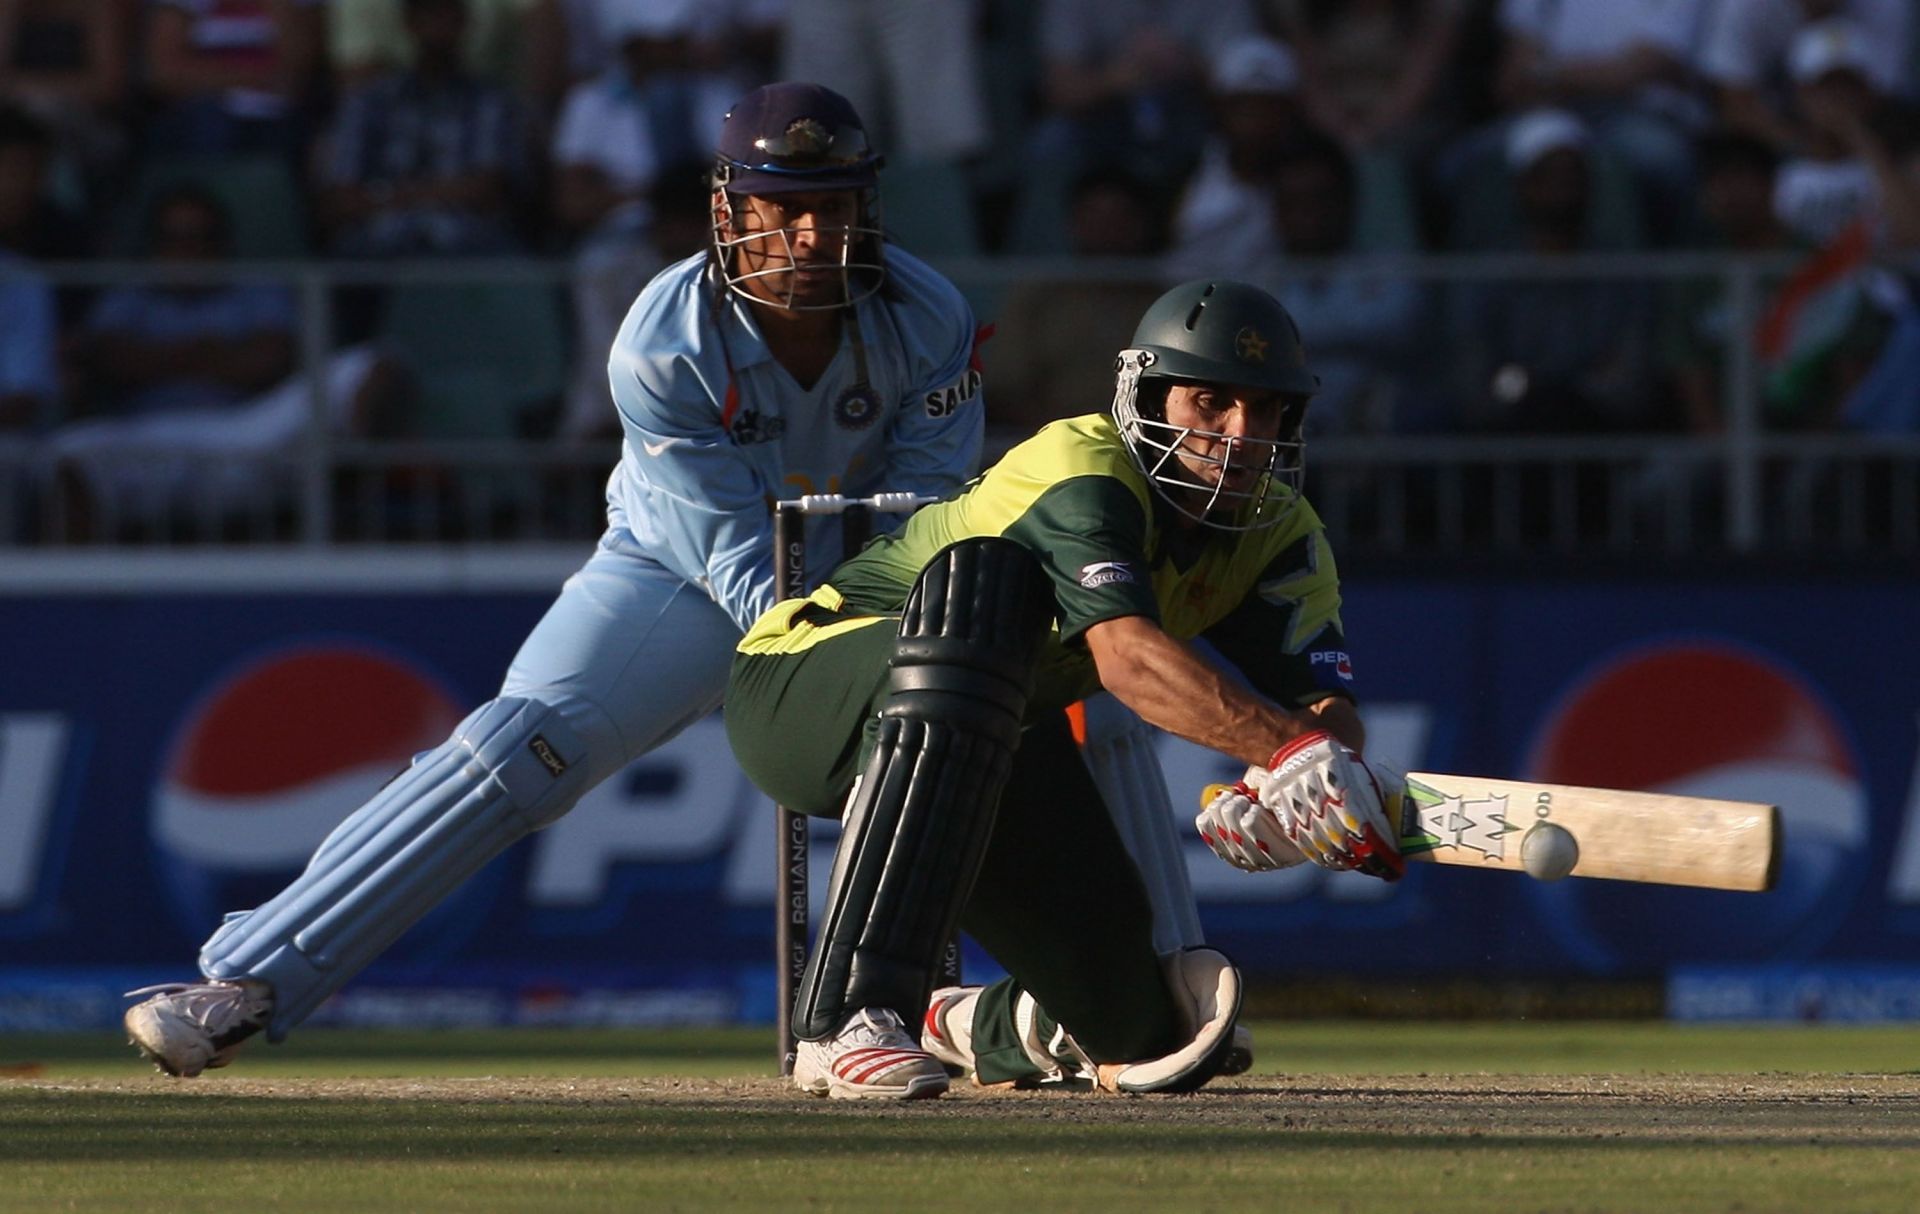 Misbah-ul-Haq bats during the 2007 T20 World Cup final against India. Pic: Getty Images